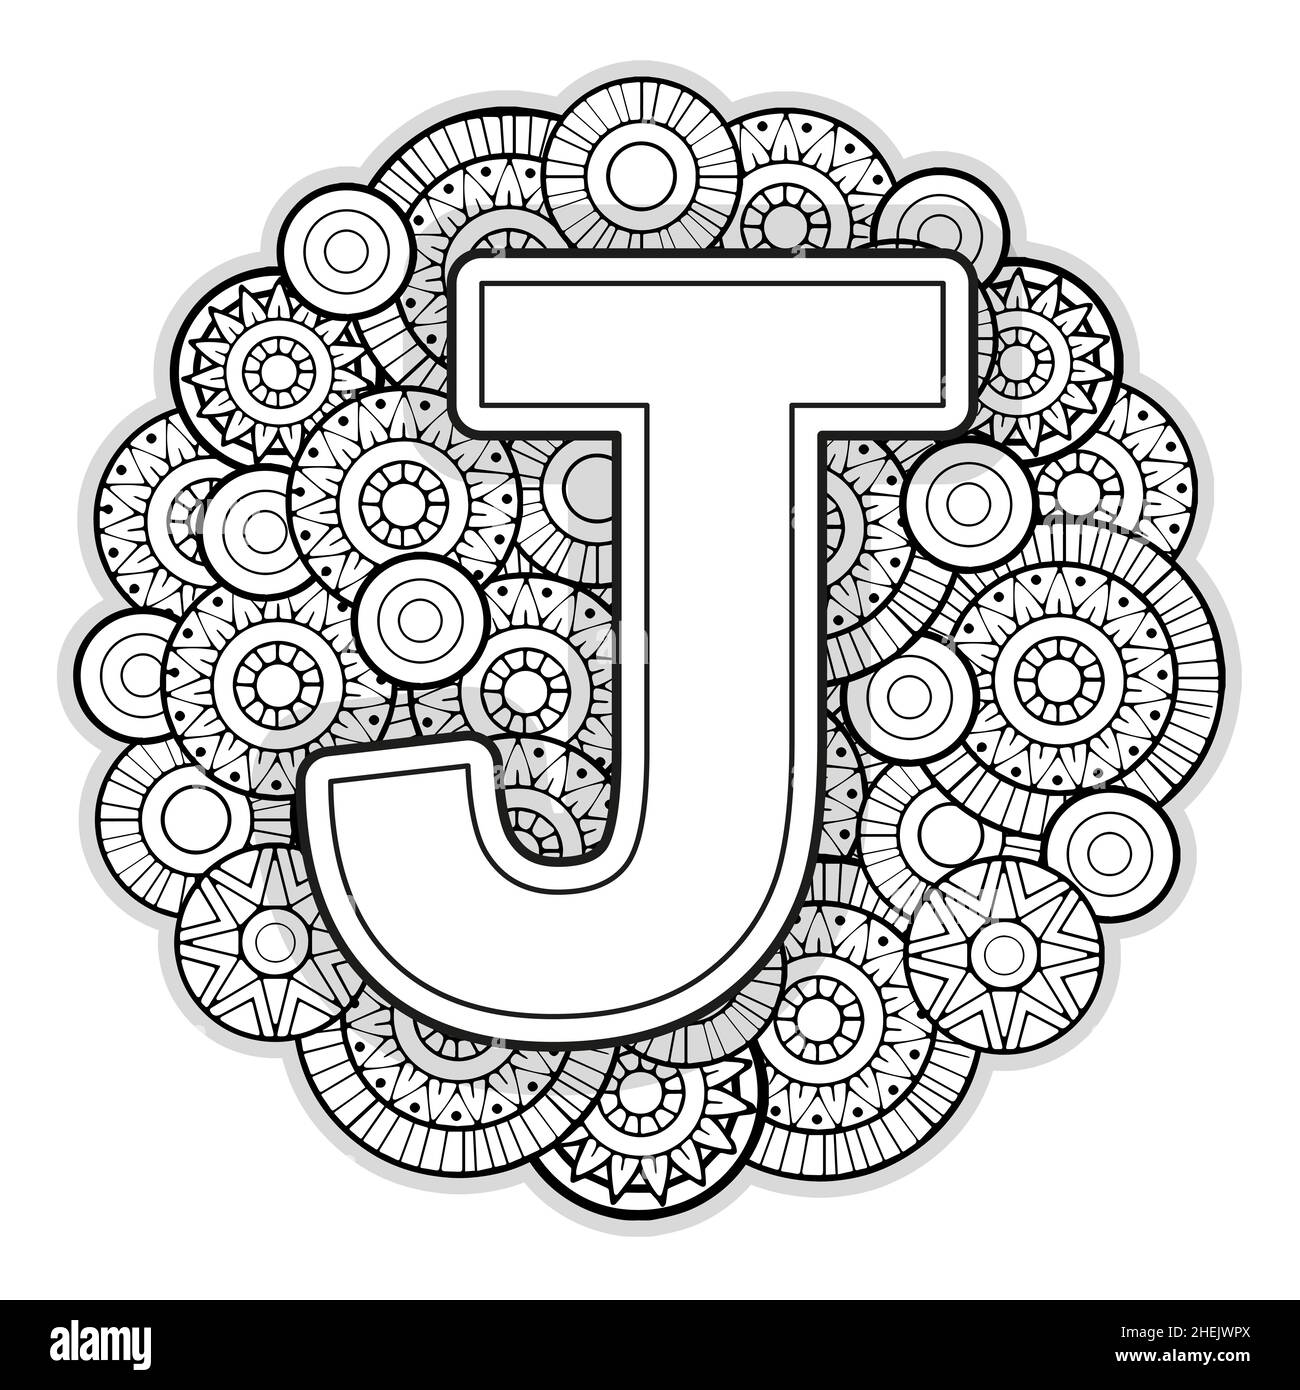 Vector coloring page for adults contour black and white capital english letter j on a mandala background stock vector image art